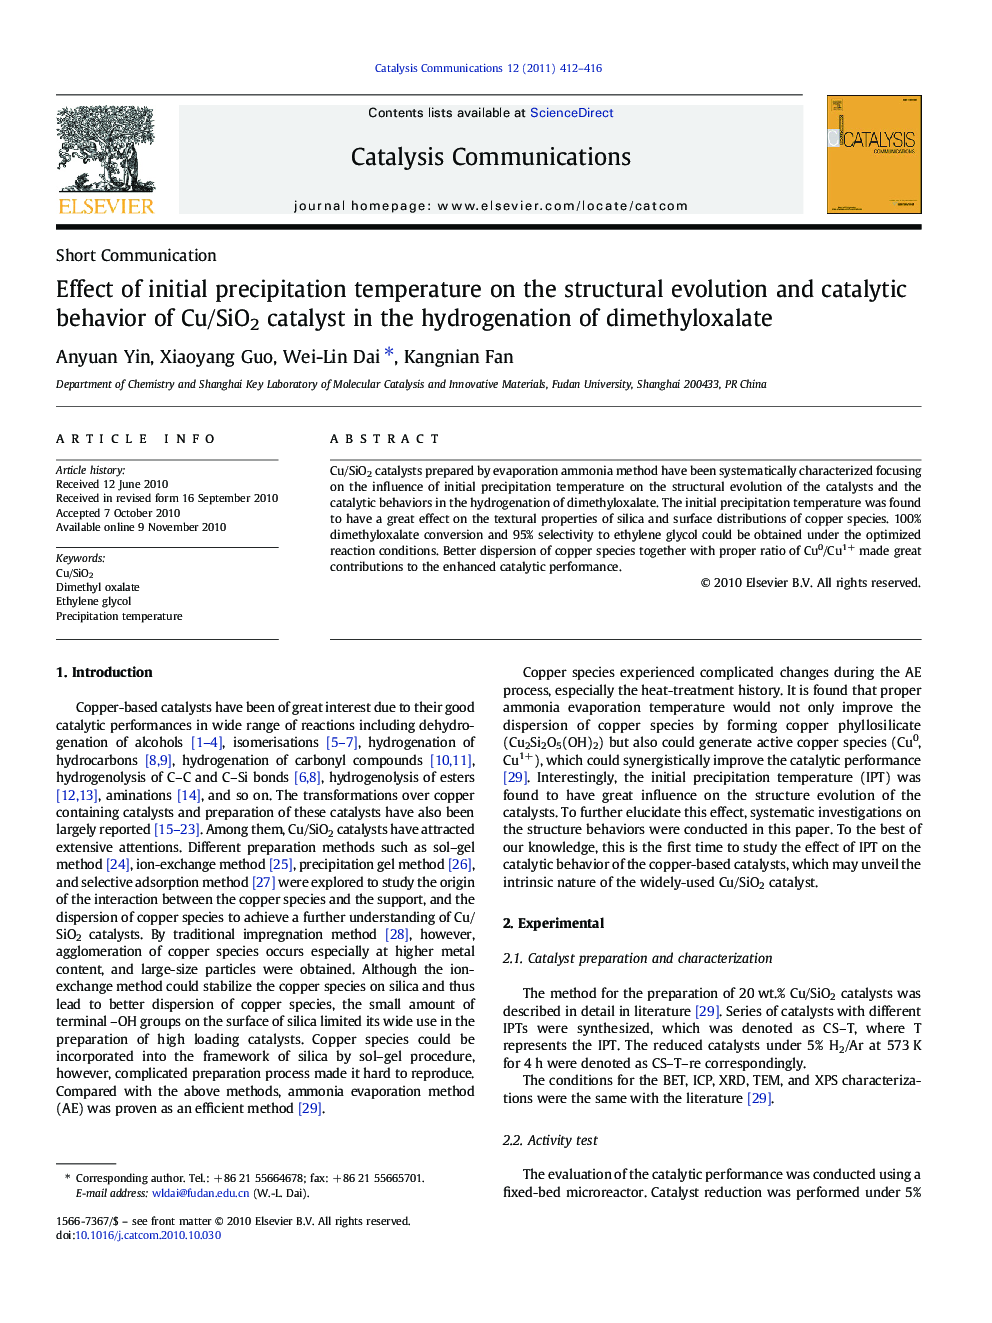 Effect of initial precipitation temperature on the structural evolution and catalytic behavior of Cu/SiO2 catalyst in the hydrogenation of dimethyloxalate